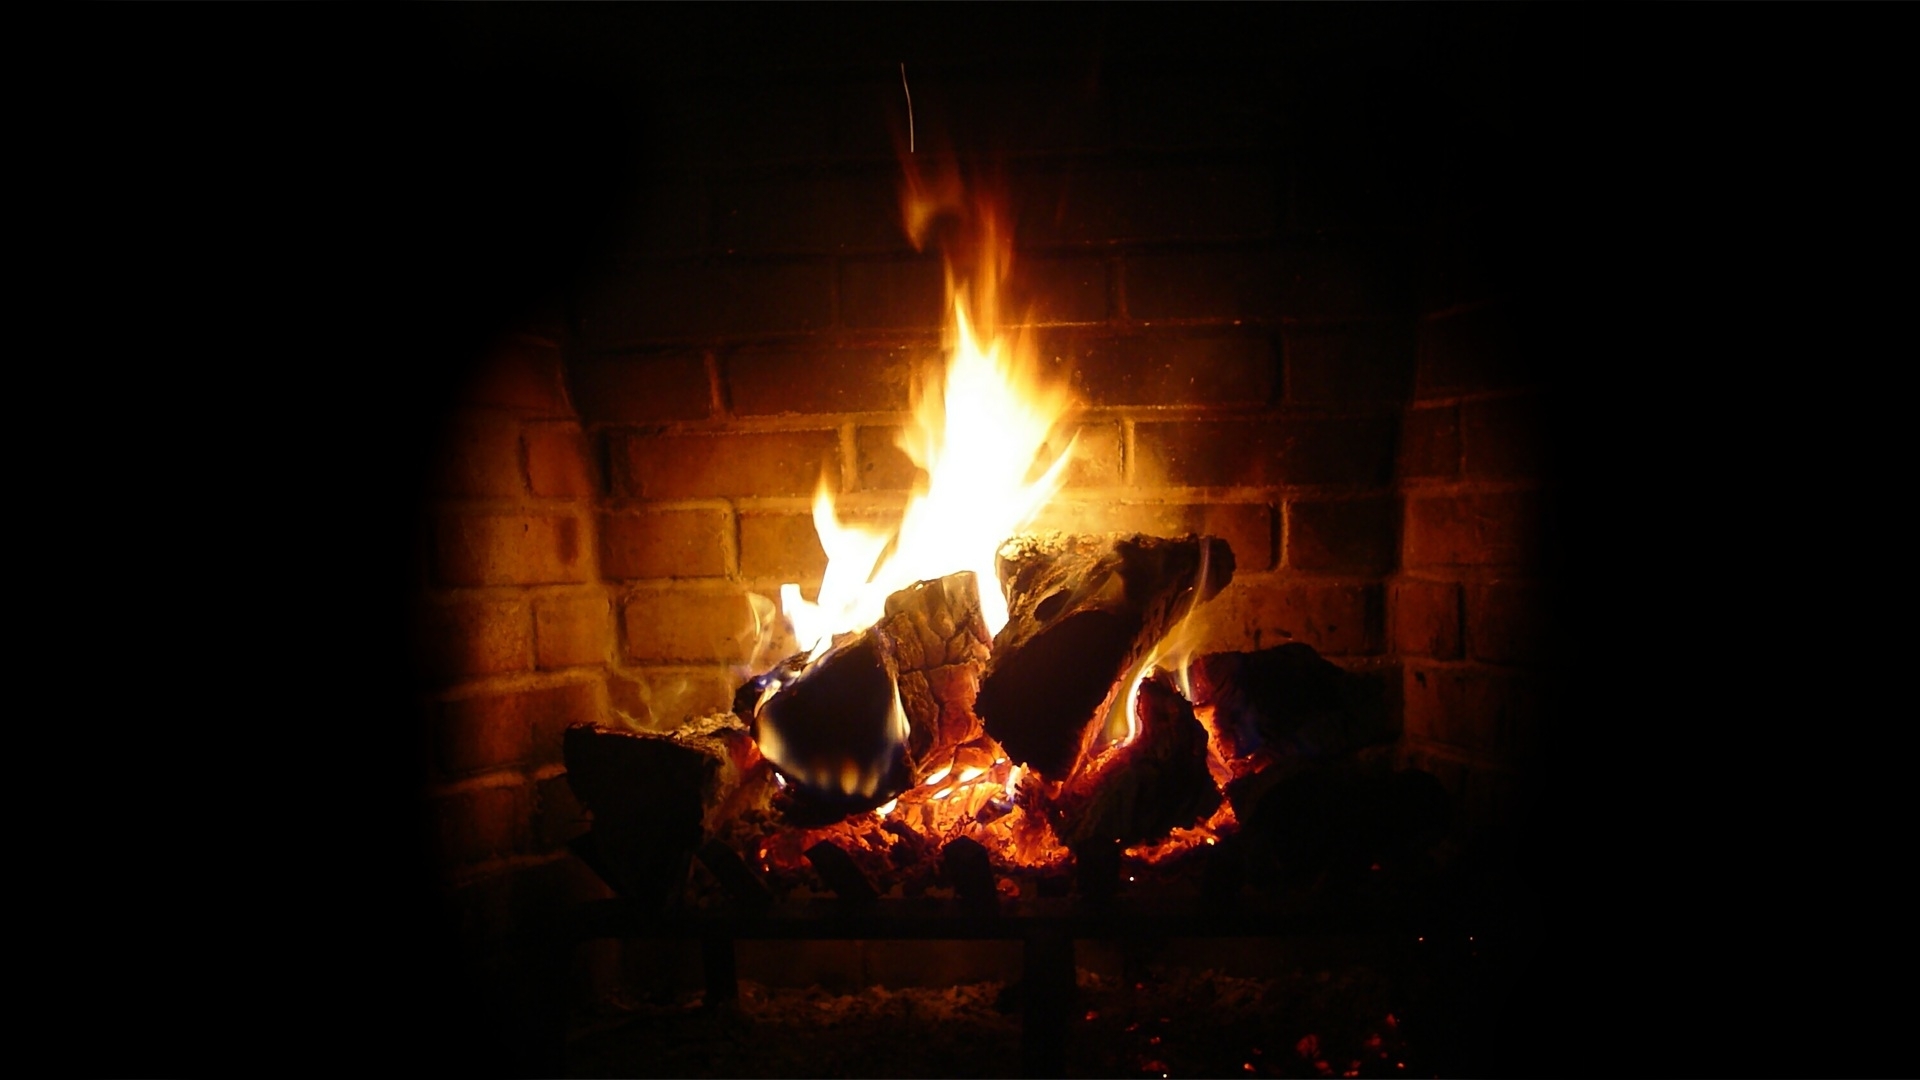 Fire Place With Lit Fire - HD Wallpaper 